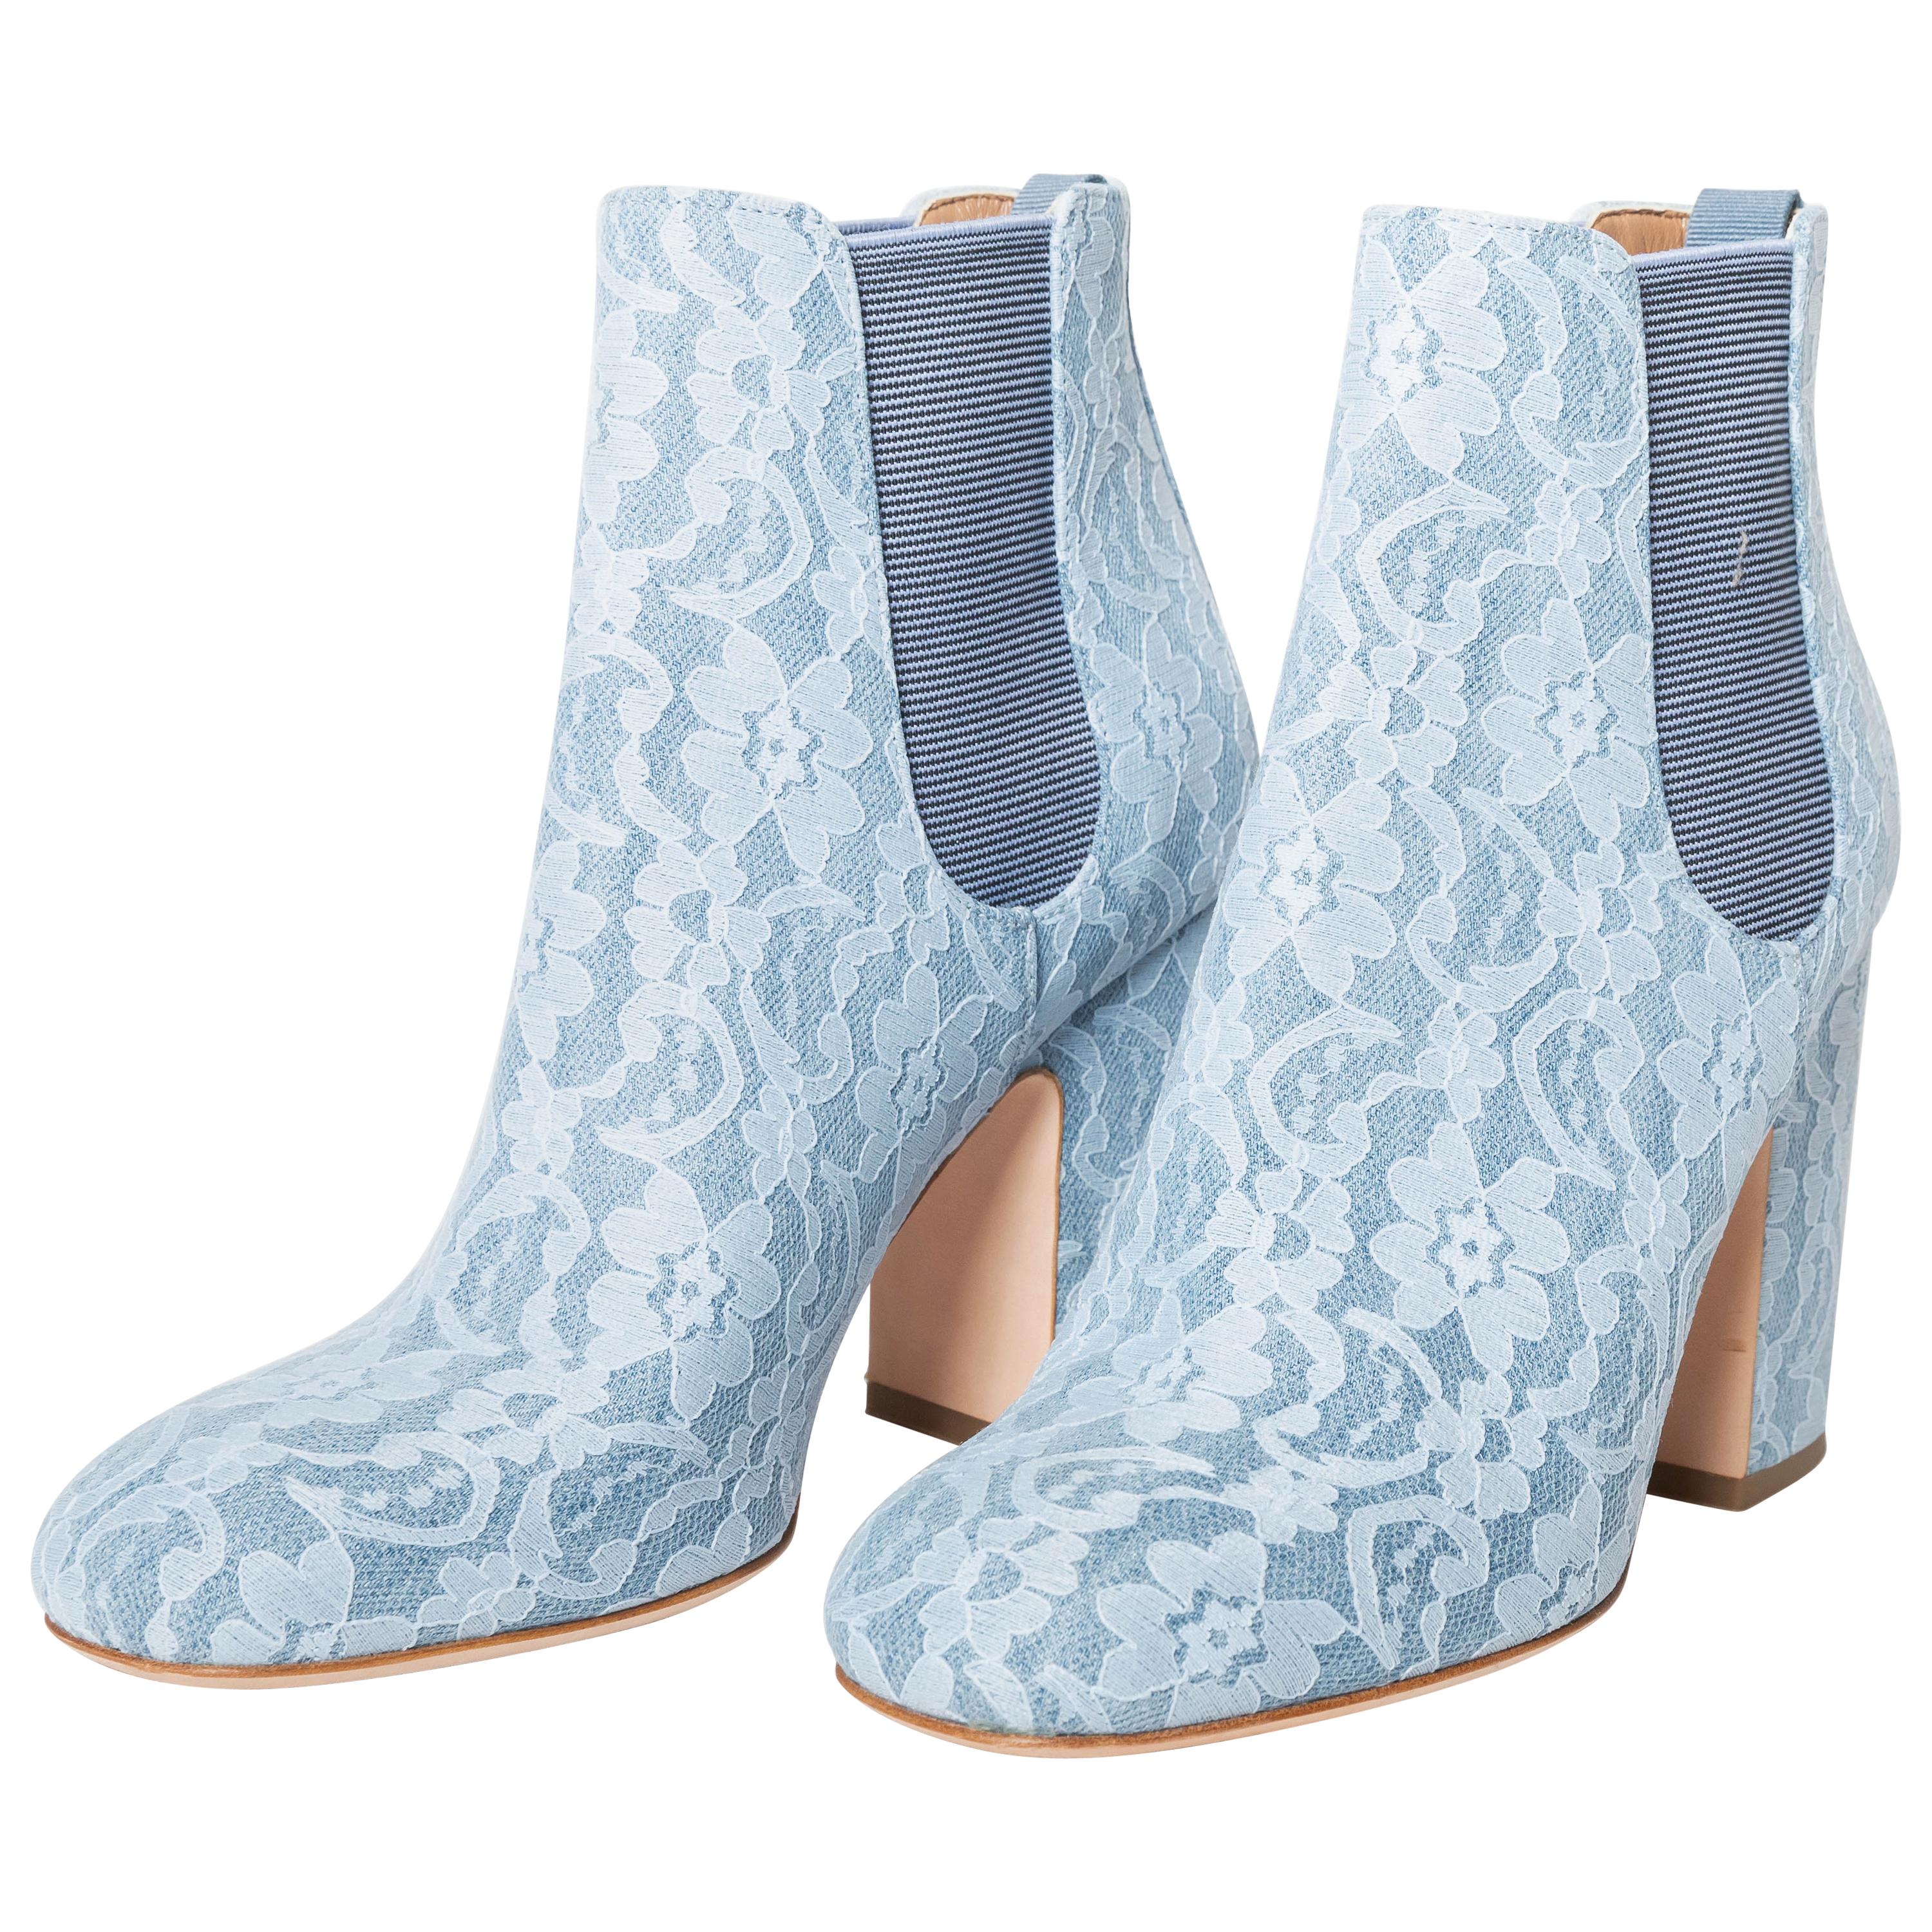 Laurence Dacade Lace Booties - Size 39 / 9 For Sale